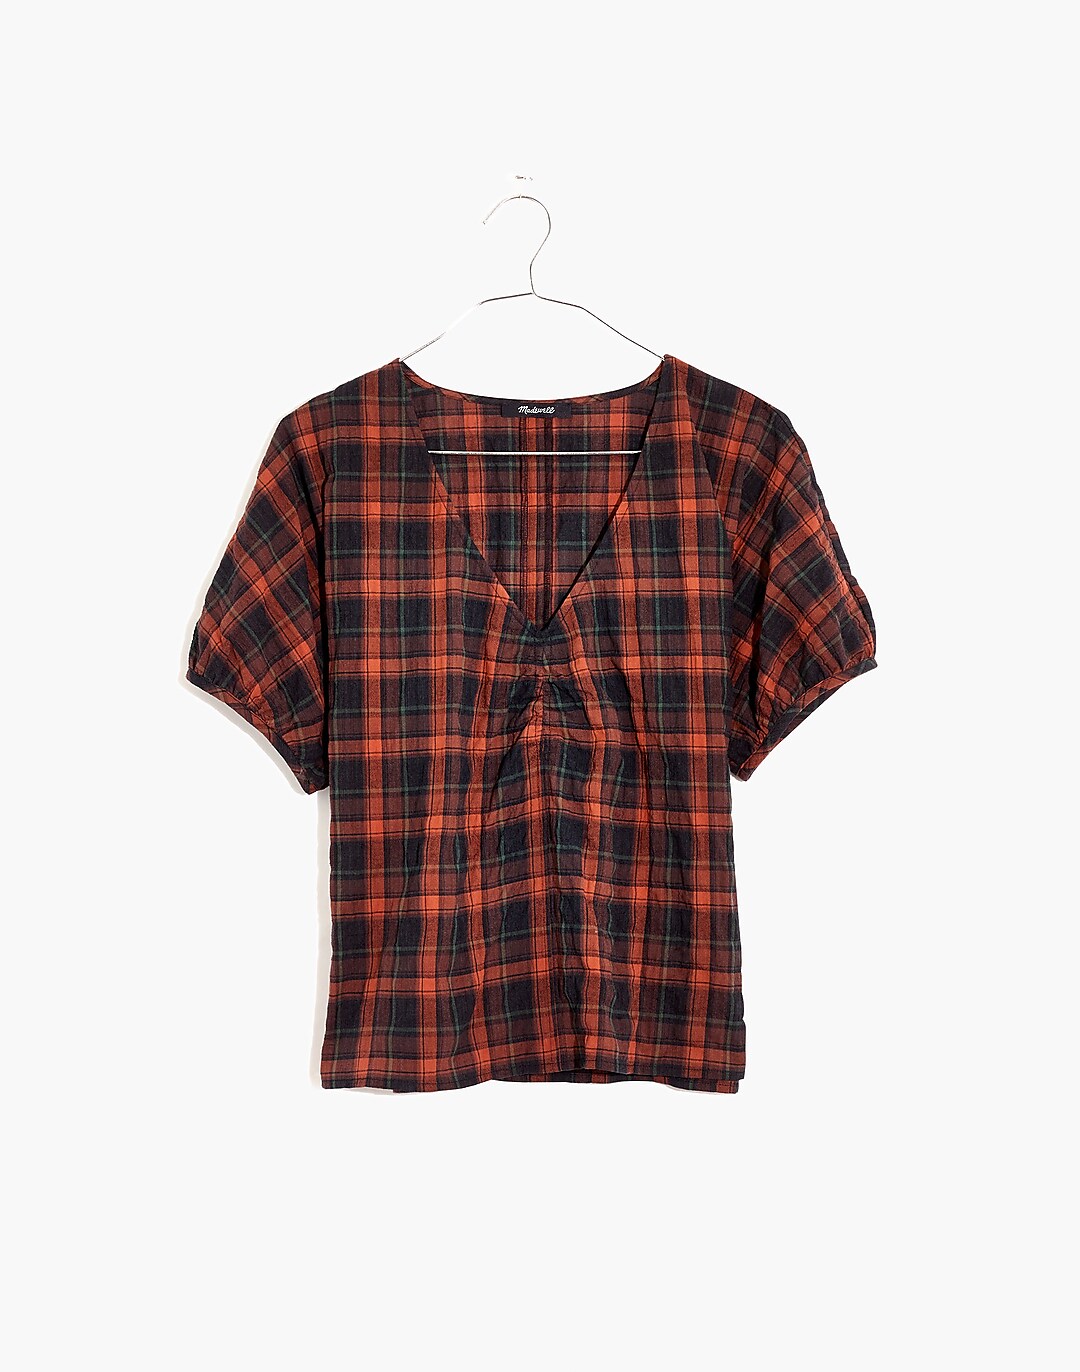 Gathered V-Neck Top in Plaid